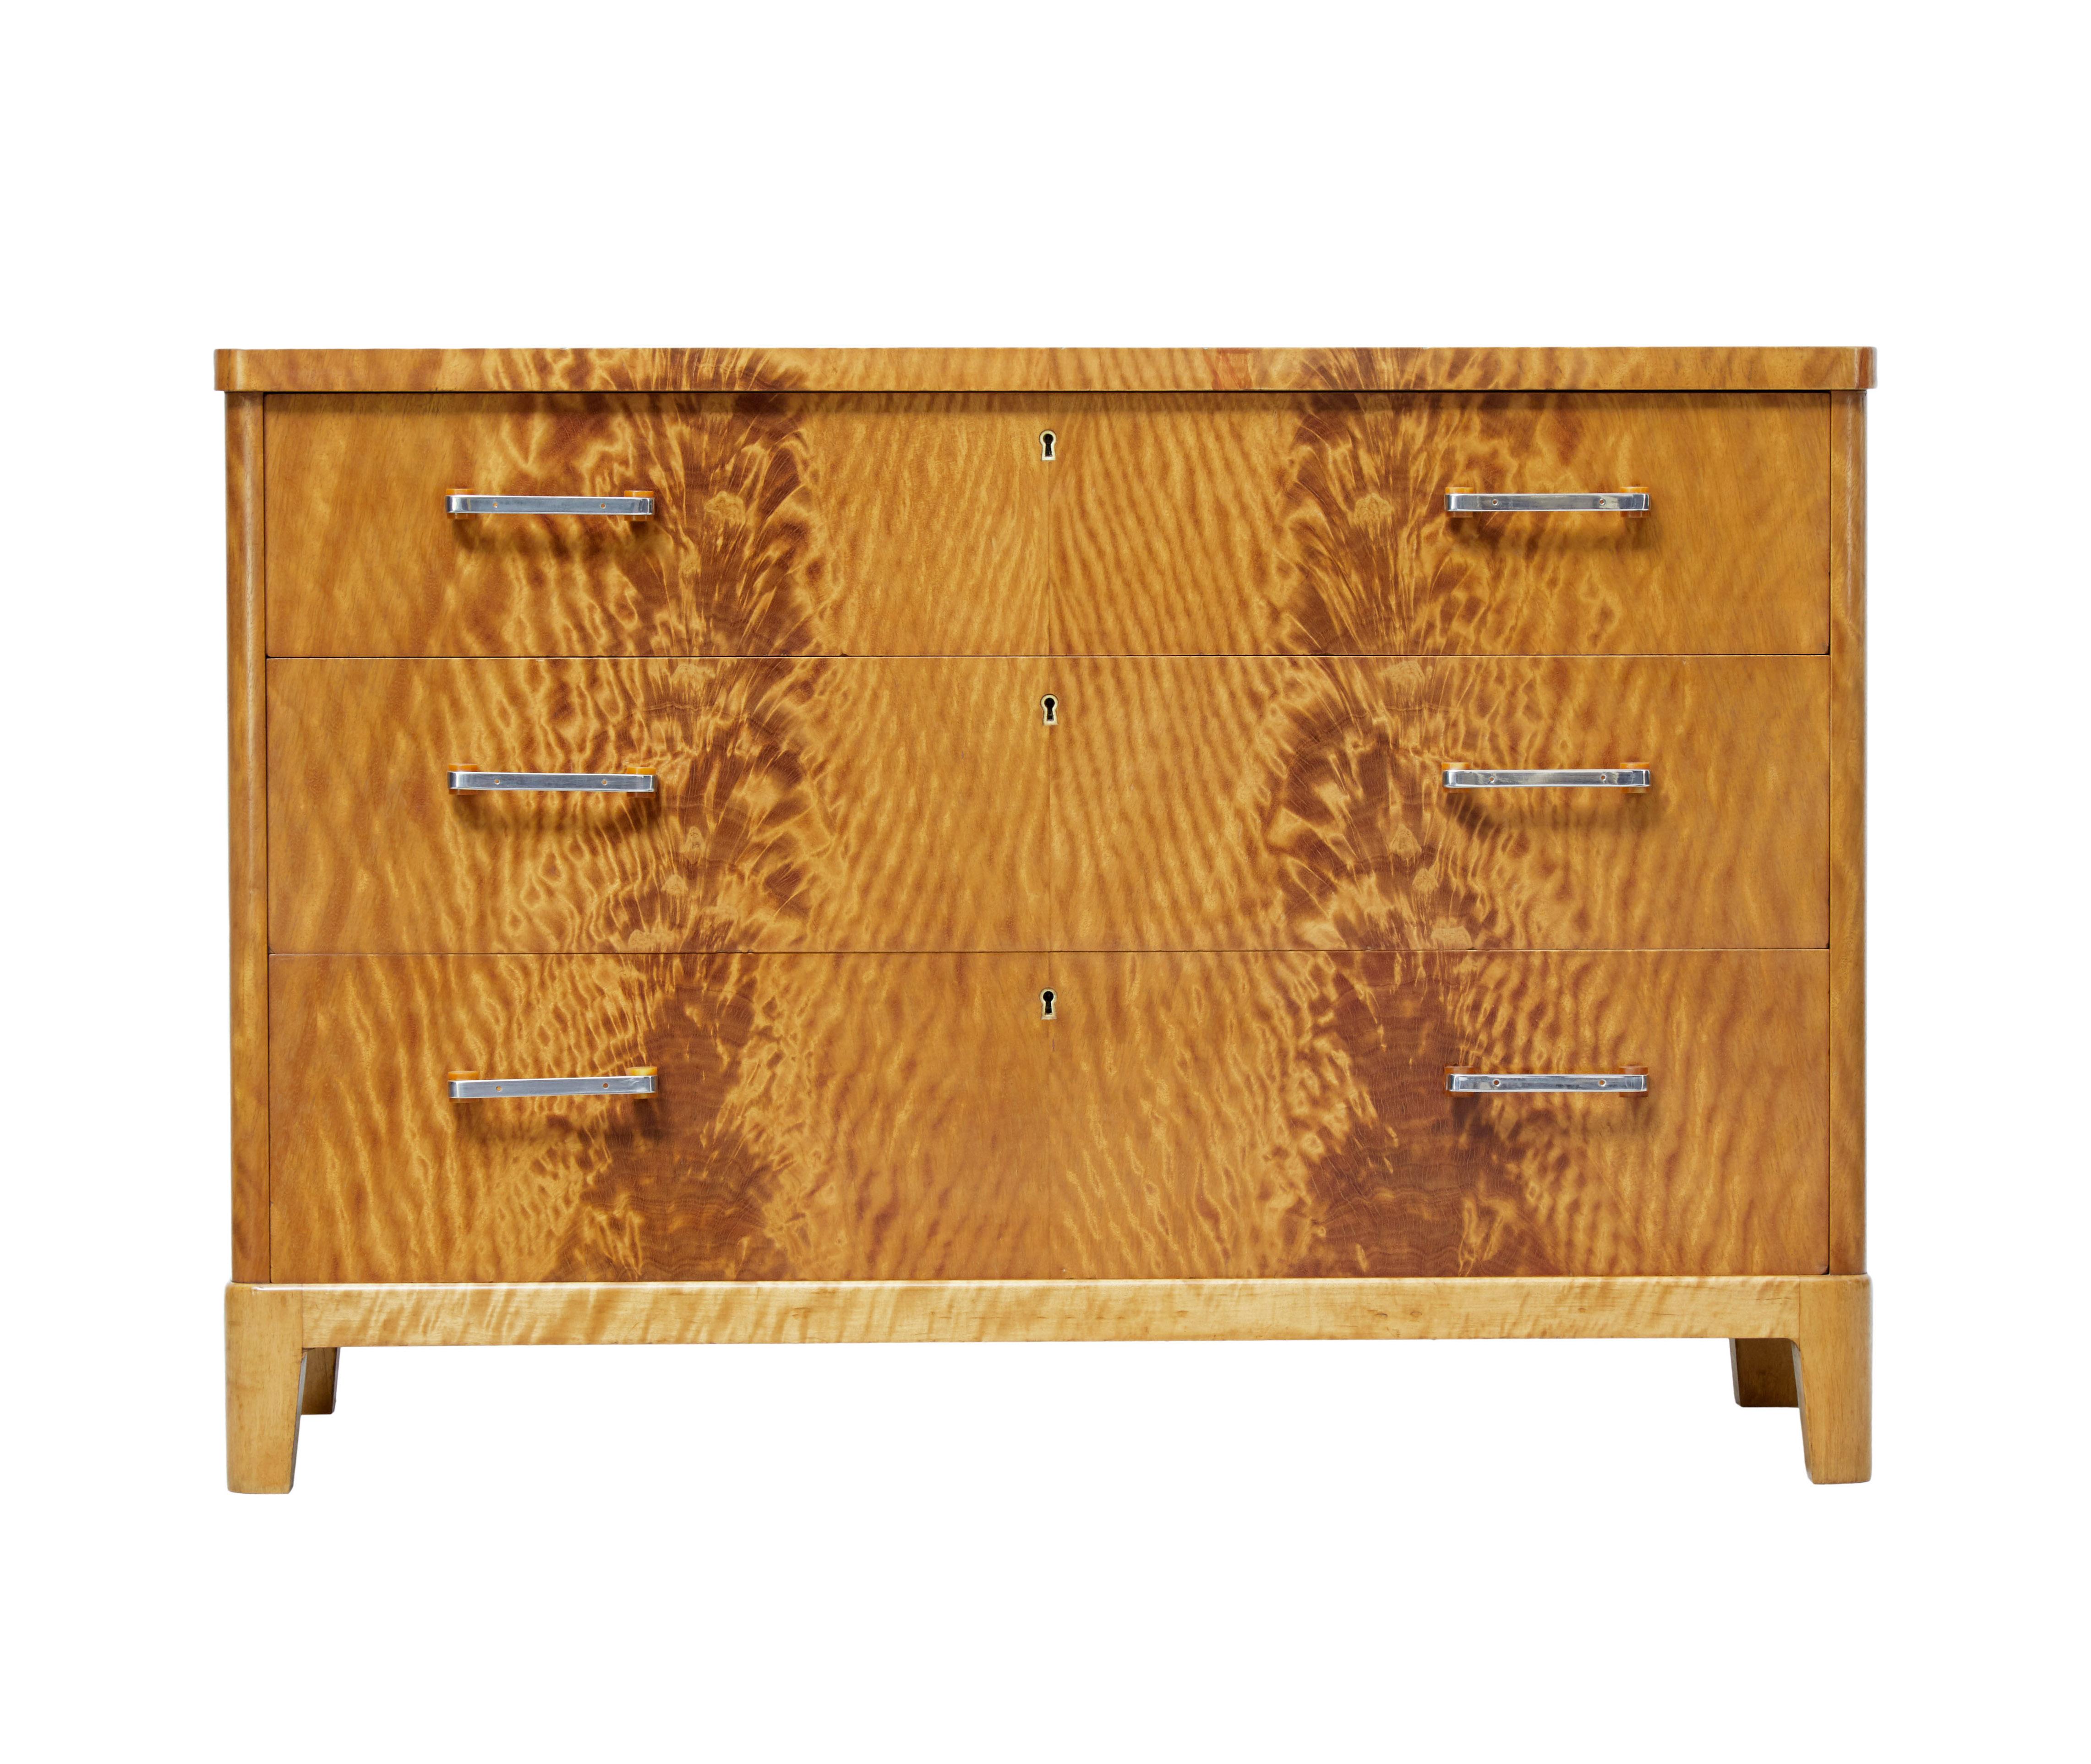 Mid-20th century fine burr birch Scandinavian Modern chest of drawers, circa 1950.

Possibly early than 1950 this deco inspired chest features striking veneers. 3 graduating drawers to the front, fitted with Bakelite and steel handles. Oak lined